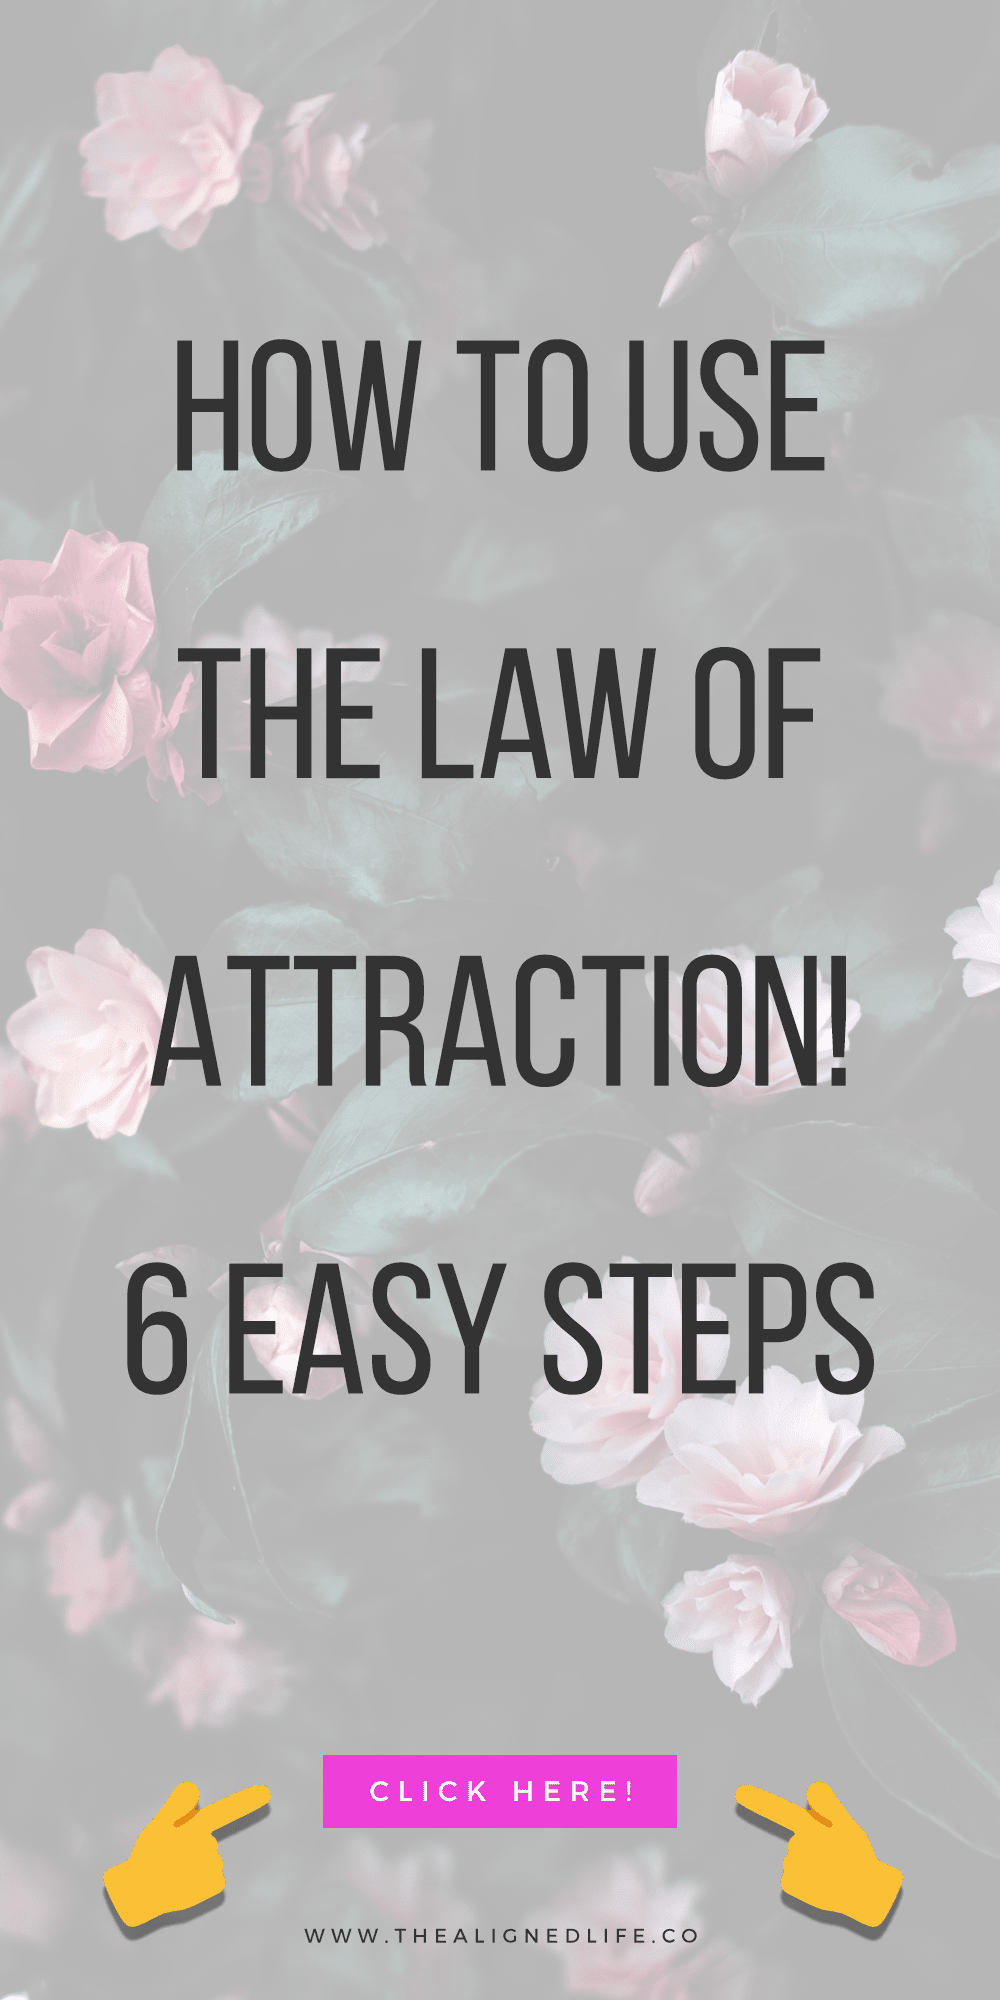 How To Use The Law of Attraction In 6 Easy Steps